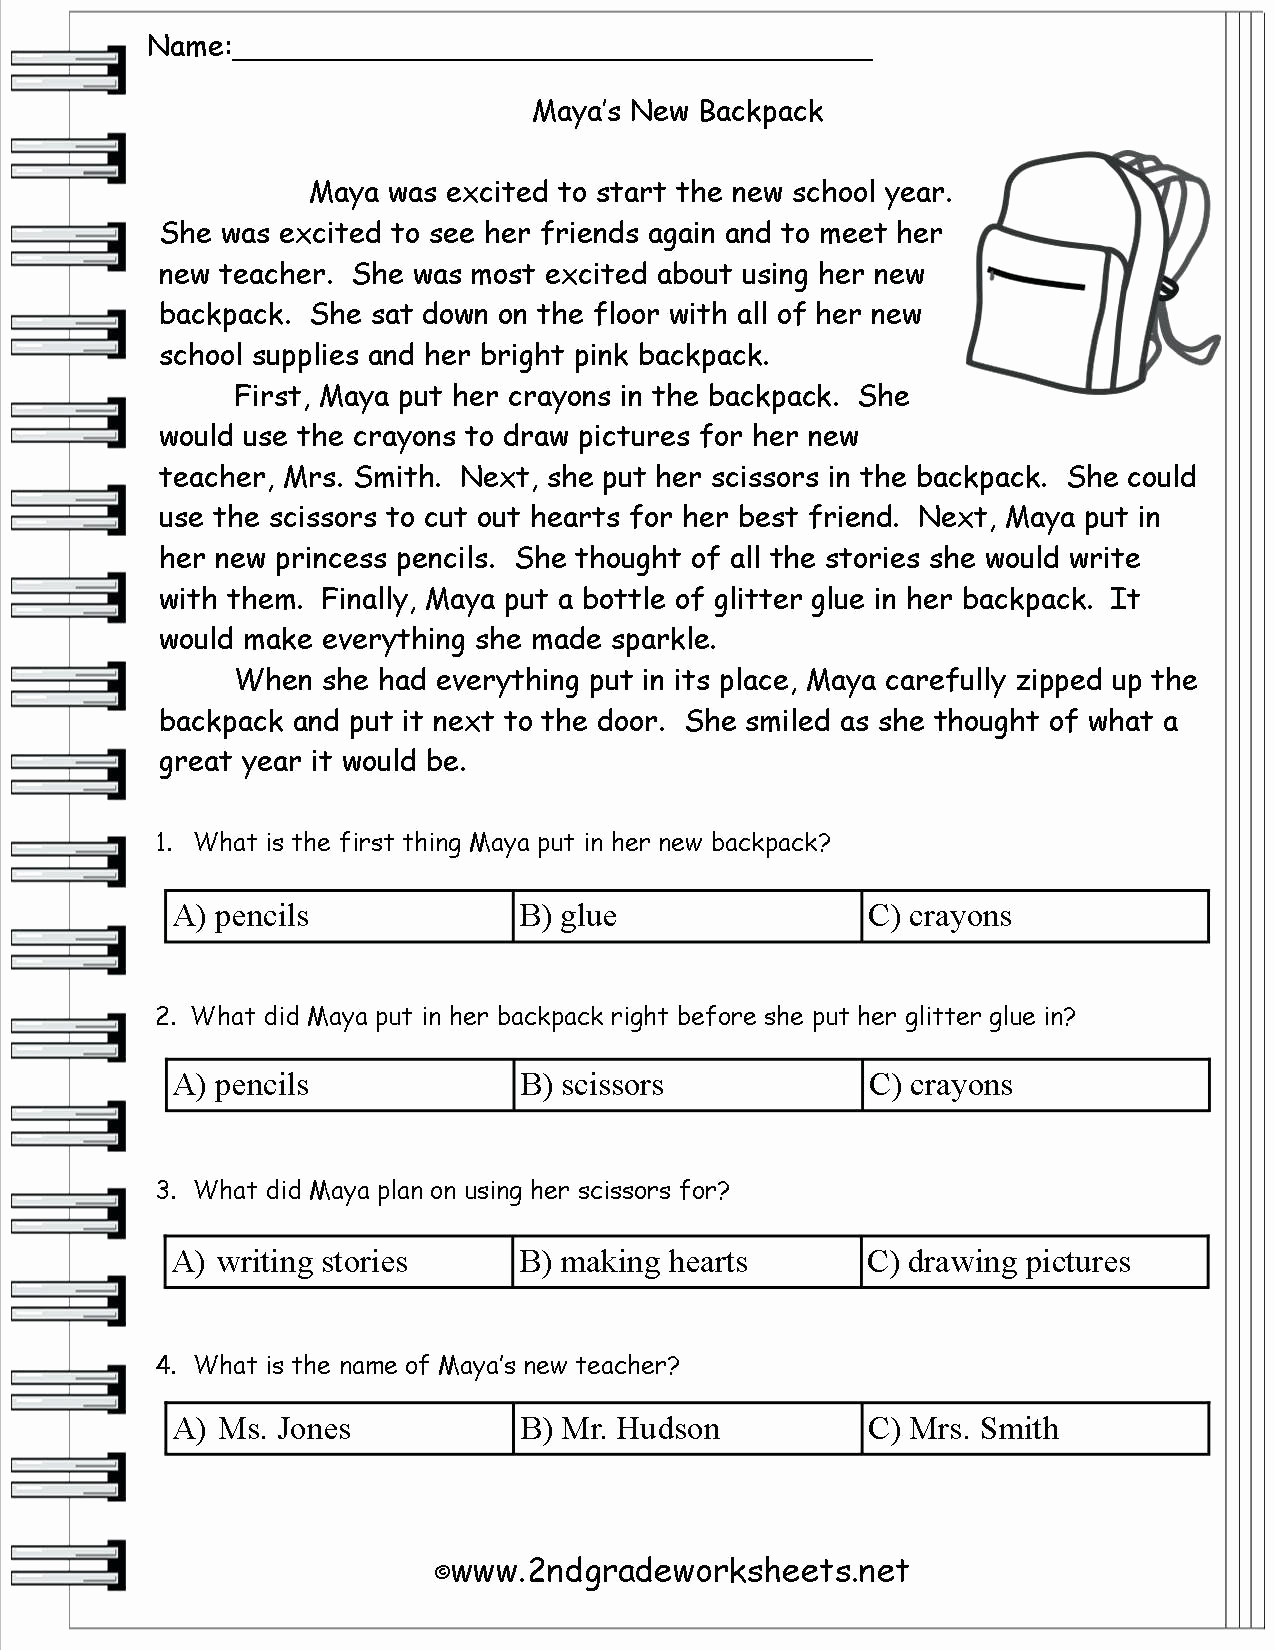 Theme Worksheets 5th Grade Lovely 20 5th Grade theme Worksheets